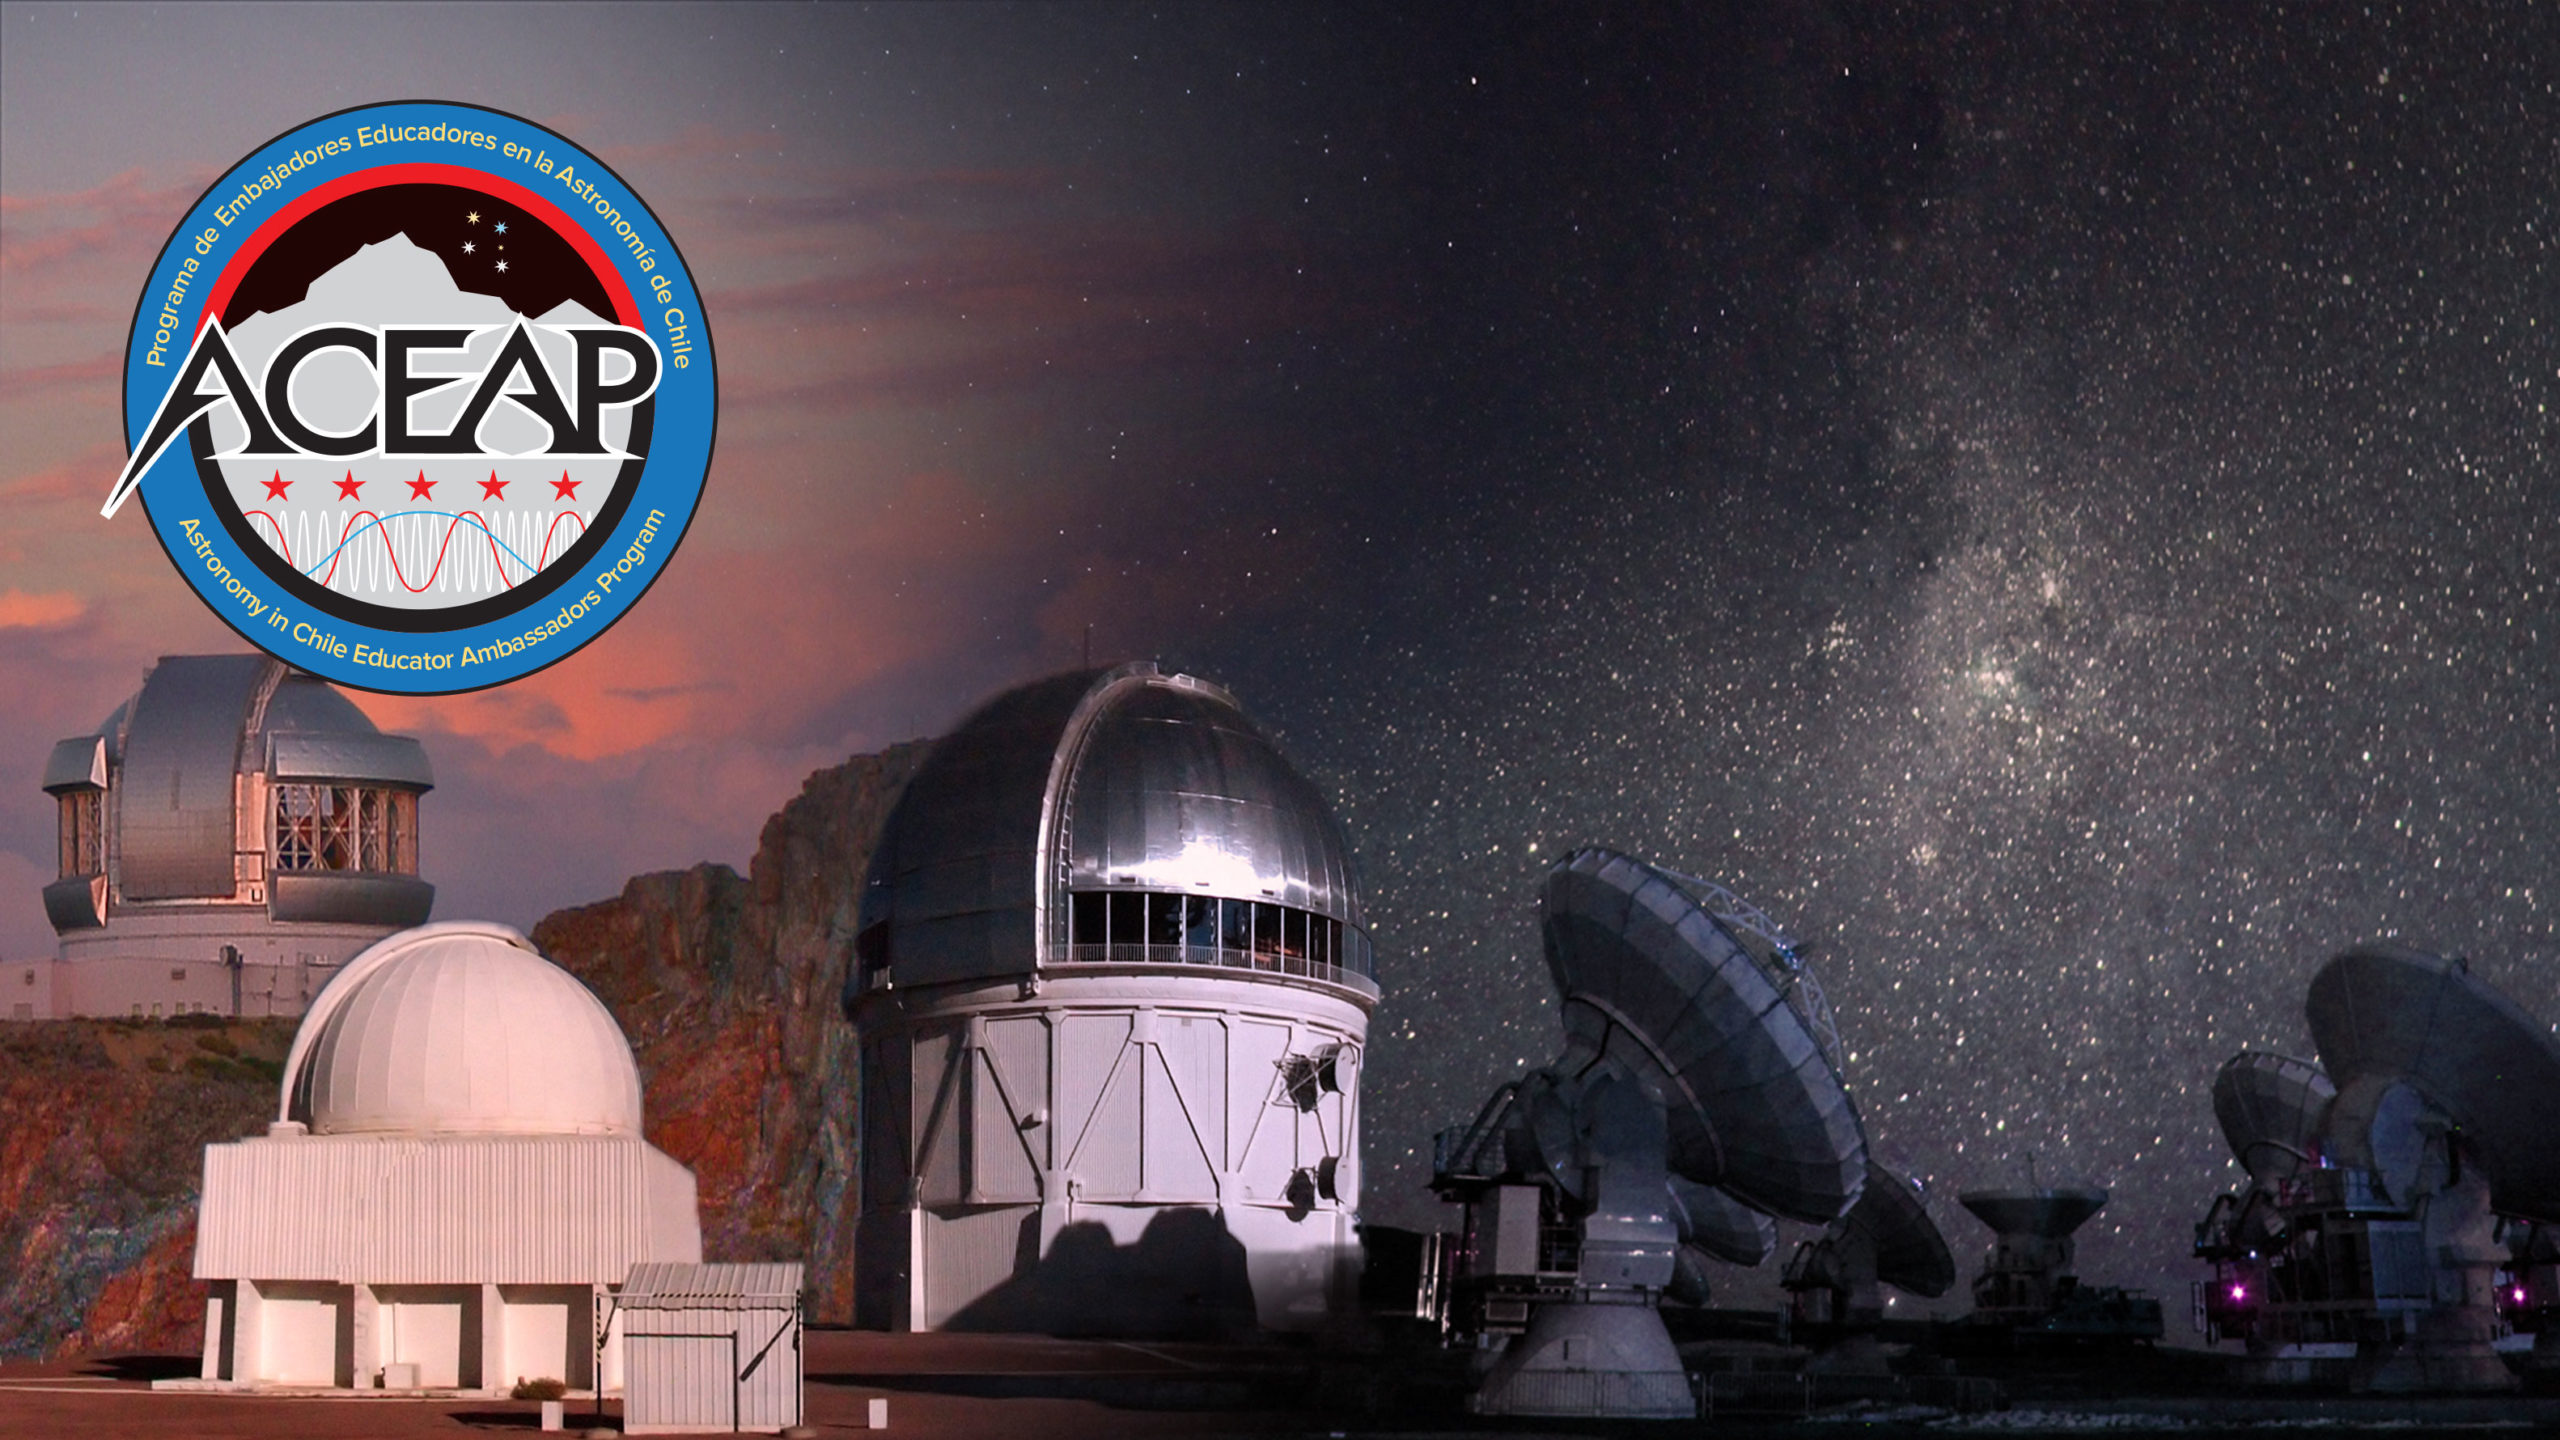 Nine More Professionals to Visit Chile for Prestigious ACEAP Astronomy Expedition